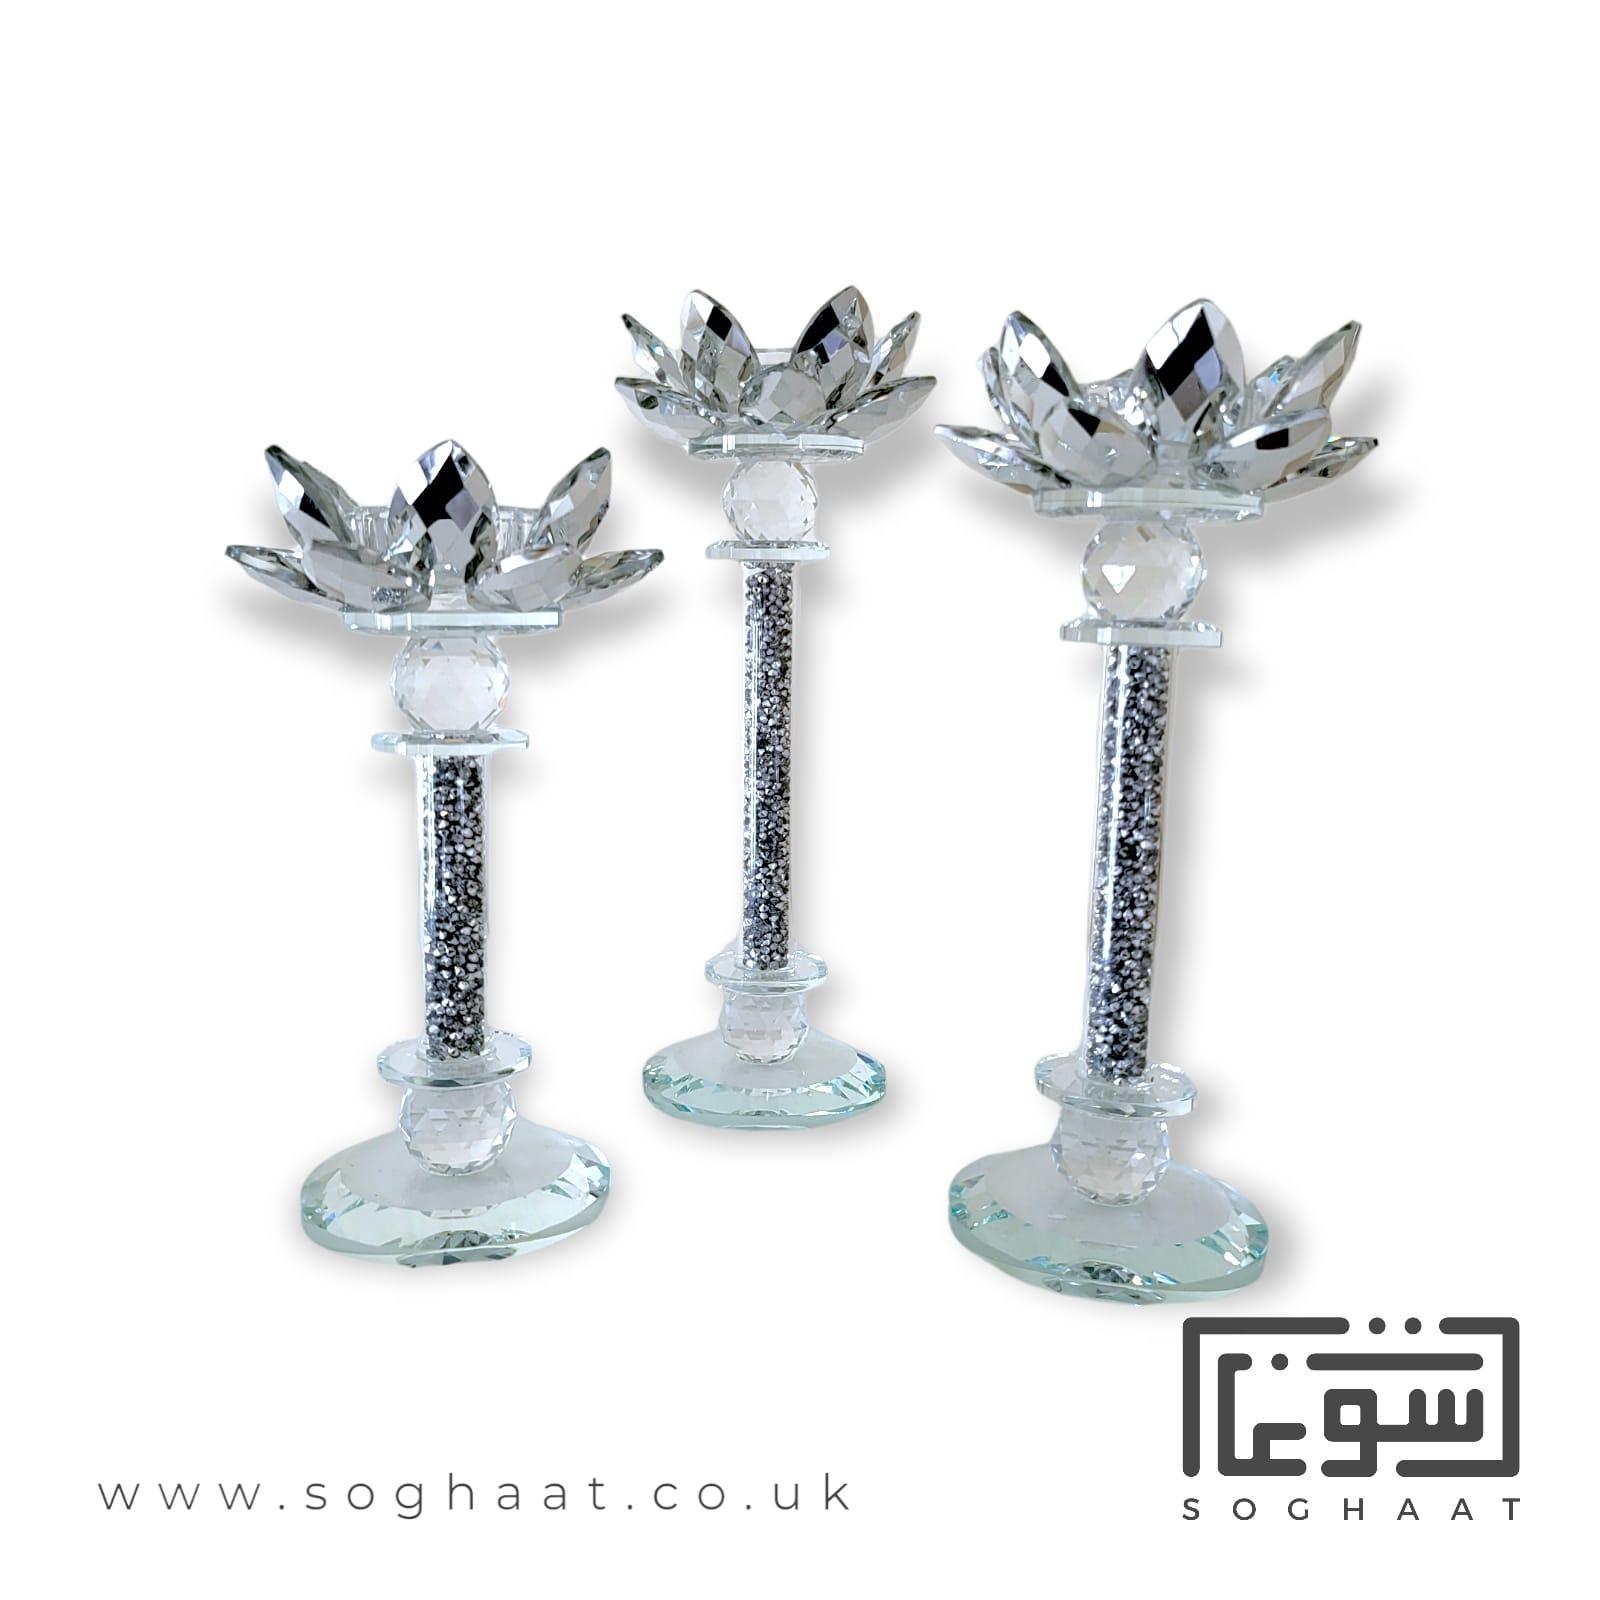 Silver Crystal Lotus And Diamante Candle Holder (Set Of 3), In A Silver Crystal Lotus Flower Design On A Diamante-Filled Stem. Tea Light Candle Or Cylinder Dinner Candle